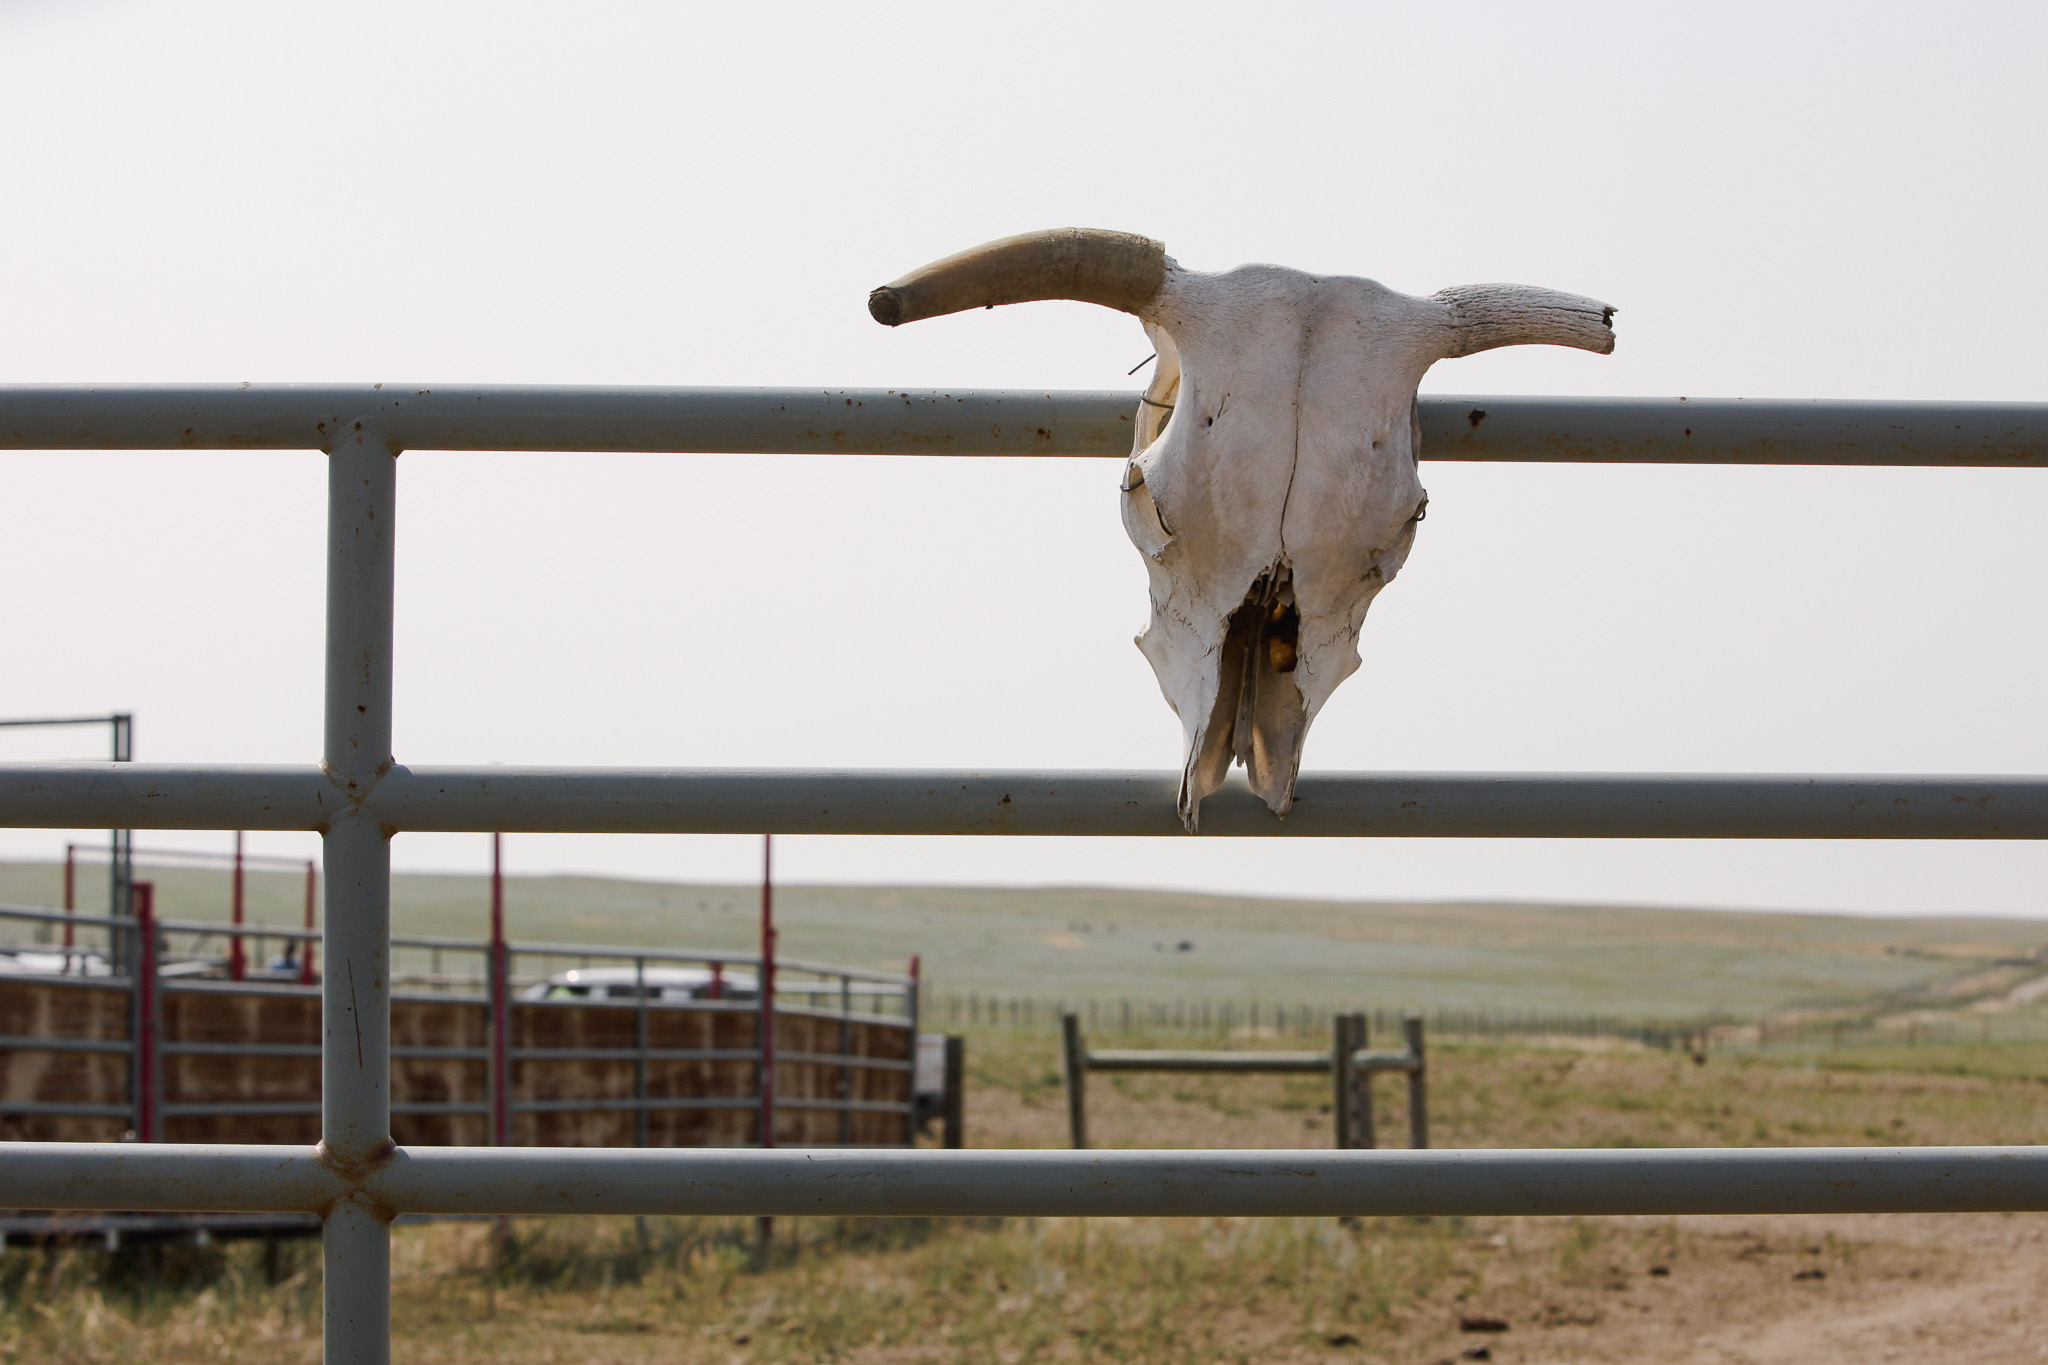 A bison skull fixed to a cattle fence.